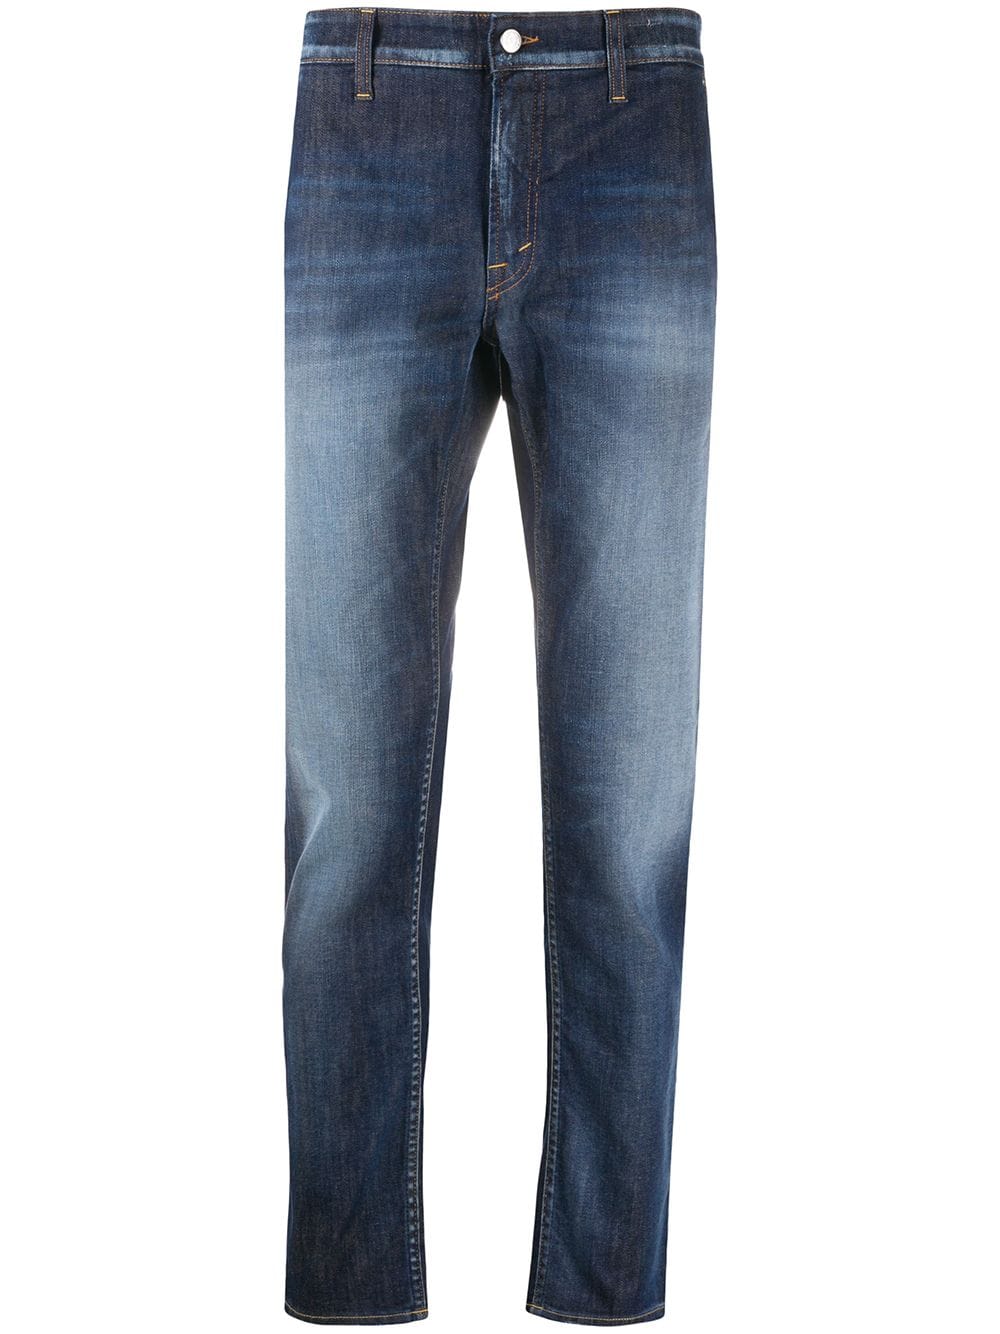 Image 1 of Department 5 9oz slim-fit stretch jeans